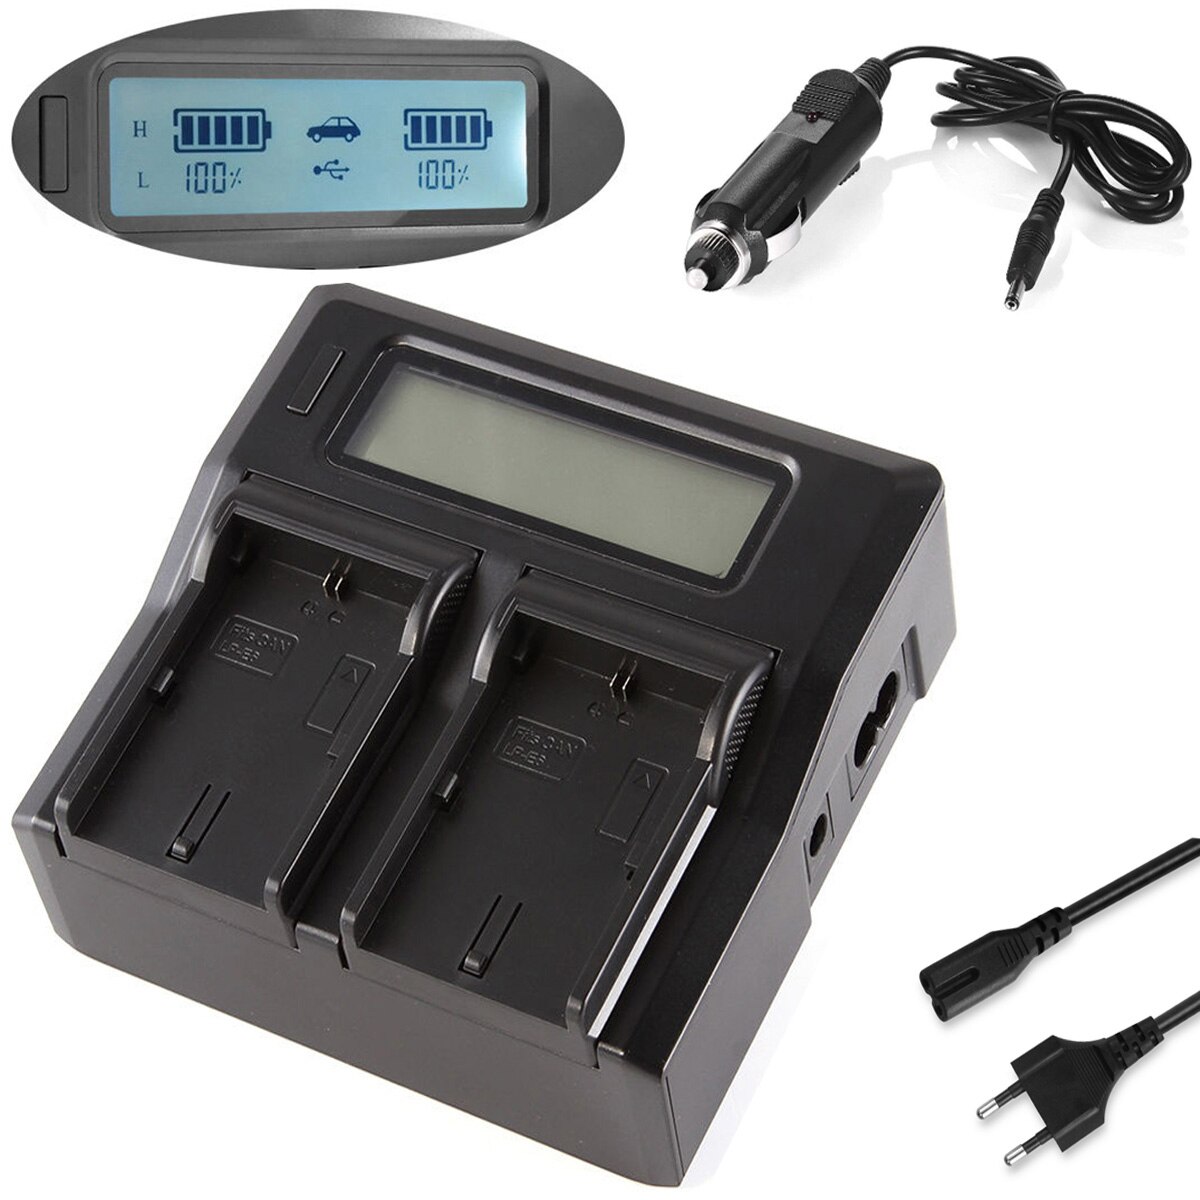 Dual Channel Lcd Display Quick Battery Charger Voor Sony NP-FV30, NP-FV50, NP-FV50A, NP-FV70, NP-FV70A, NP-FV100, NP-FV100A V Serie